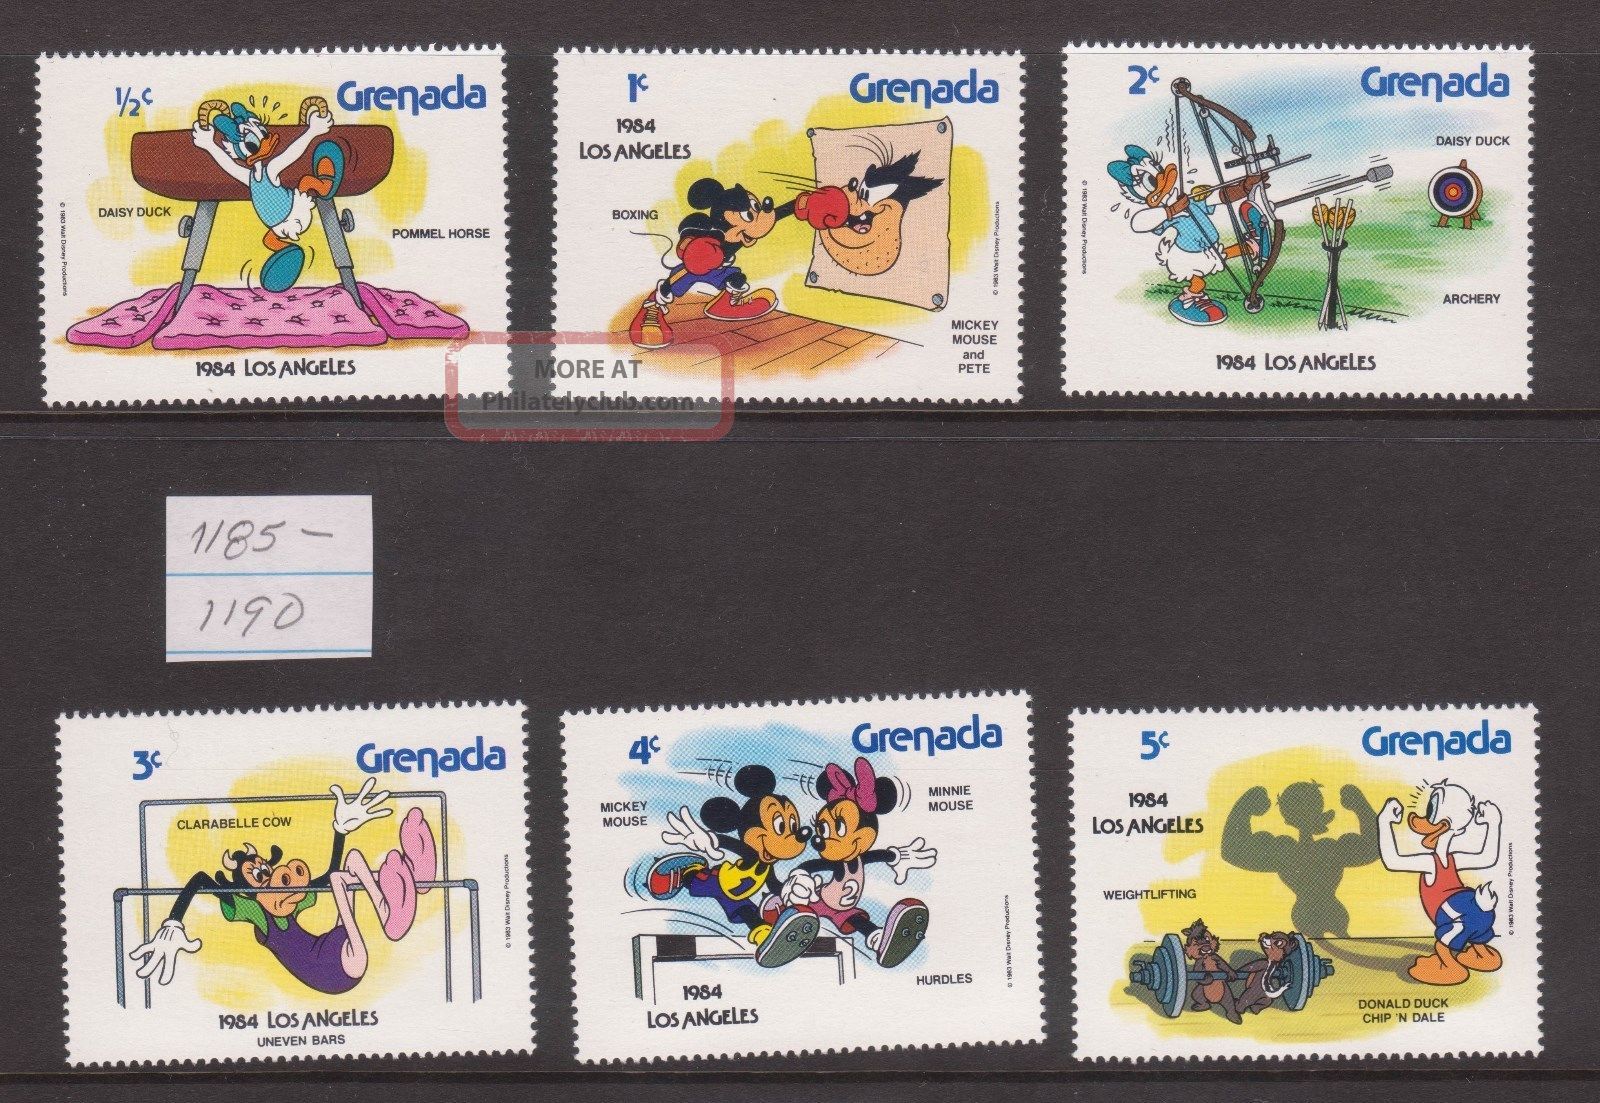 Grenada - Sc 1185 - 90 - Disney Celebrates ' 84 Summer Olympics In Los Angeles Topical Stamps photo